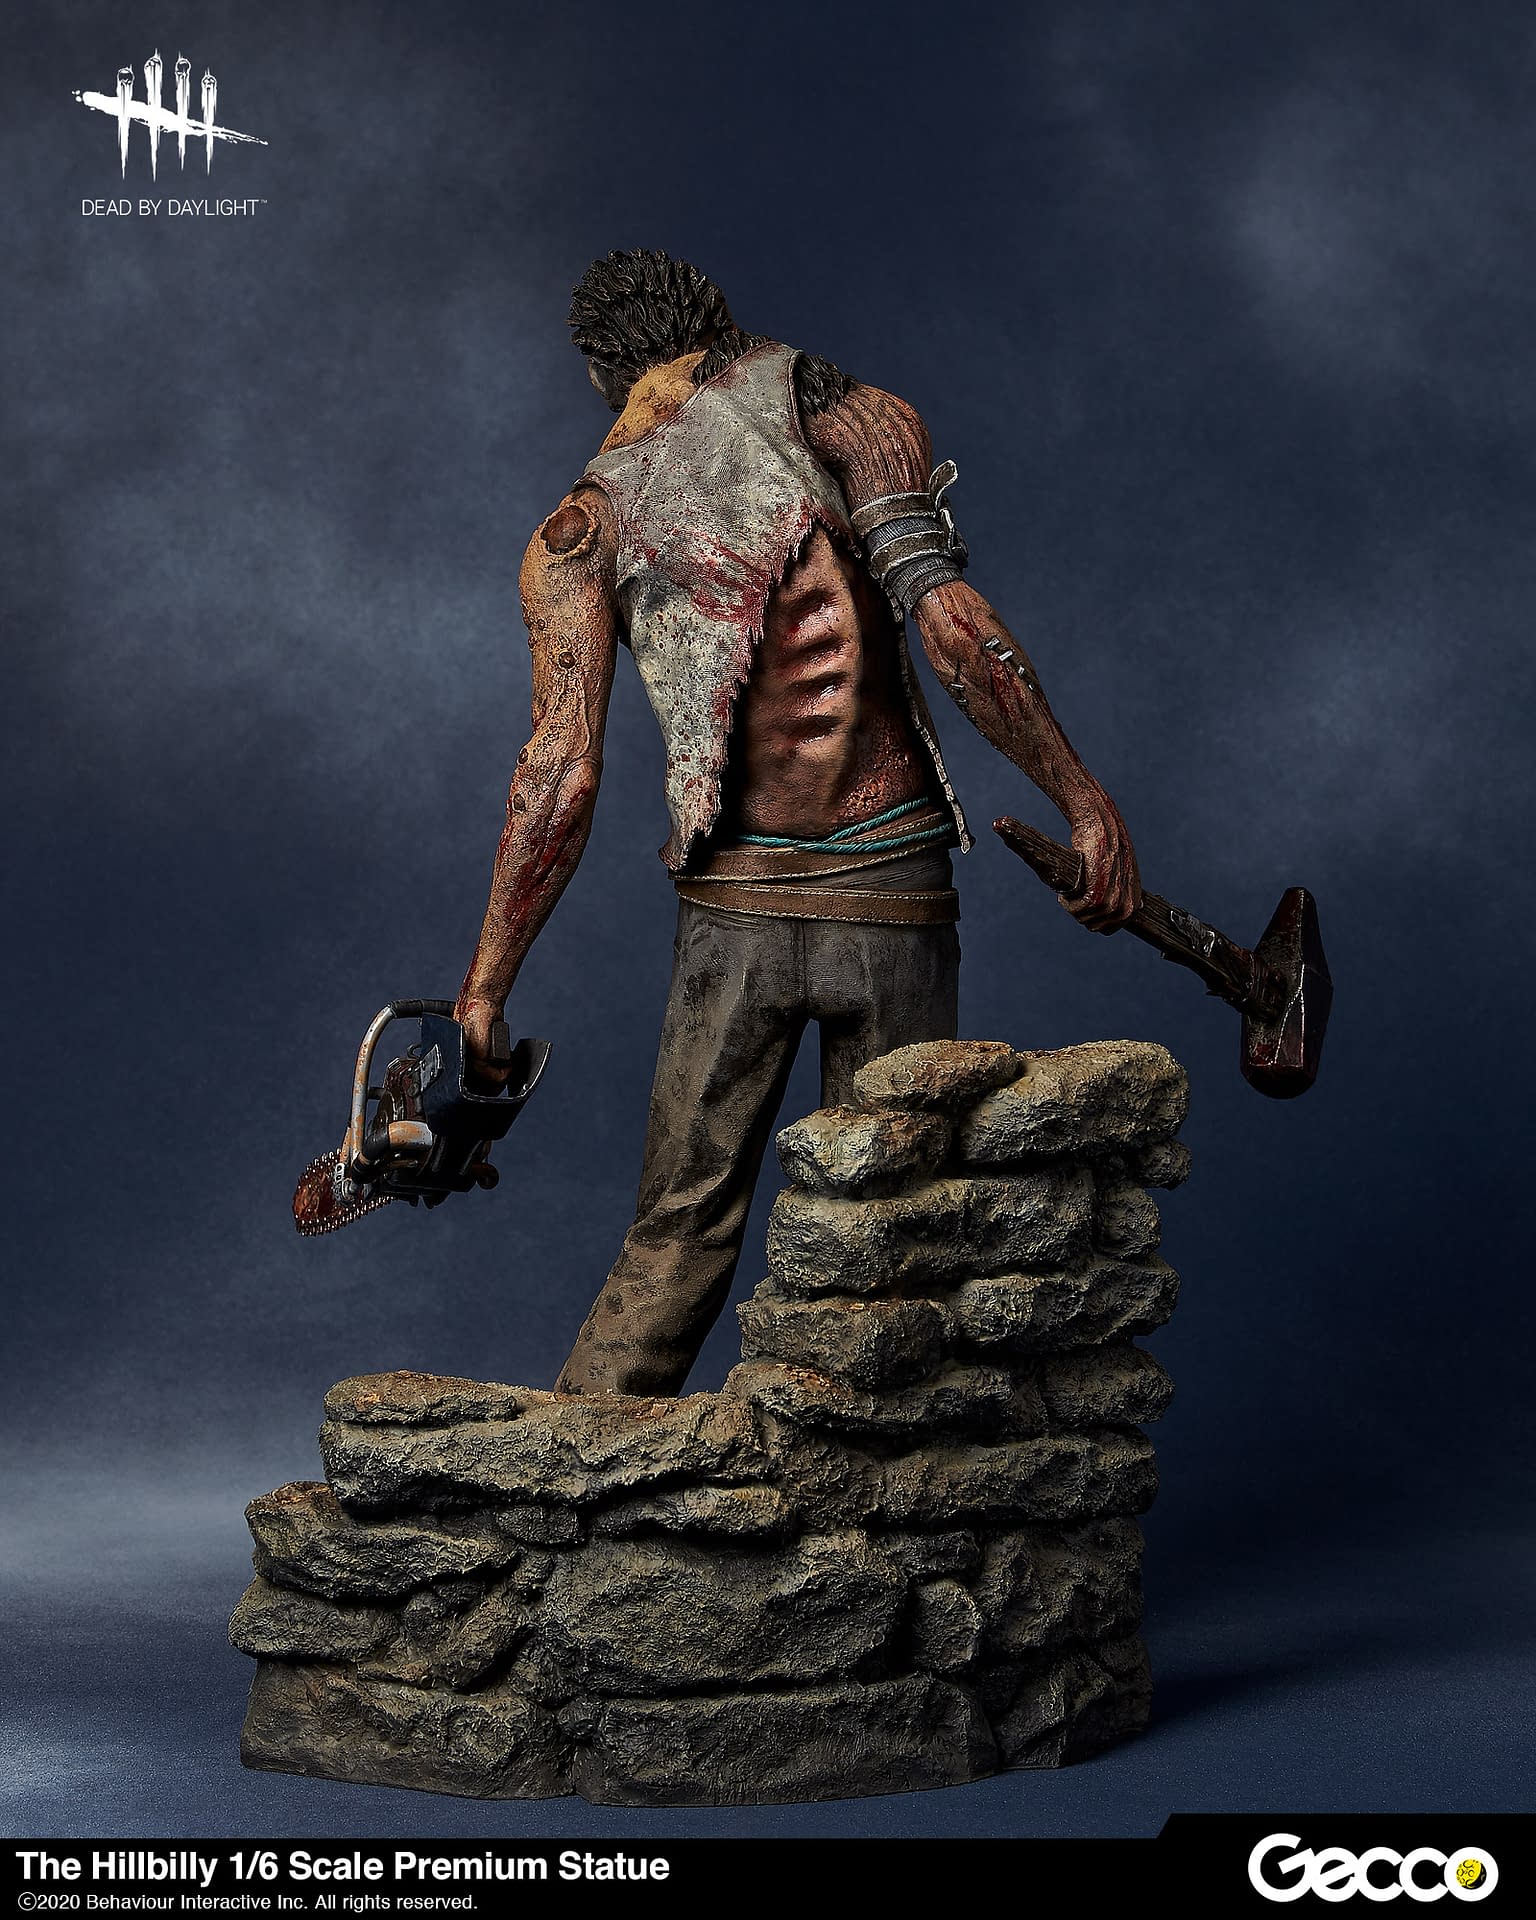 Gecco-Dead-by-Daylight-Hillbilly-Statue-006